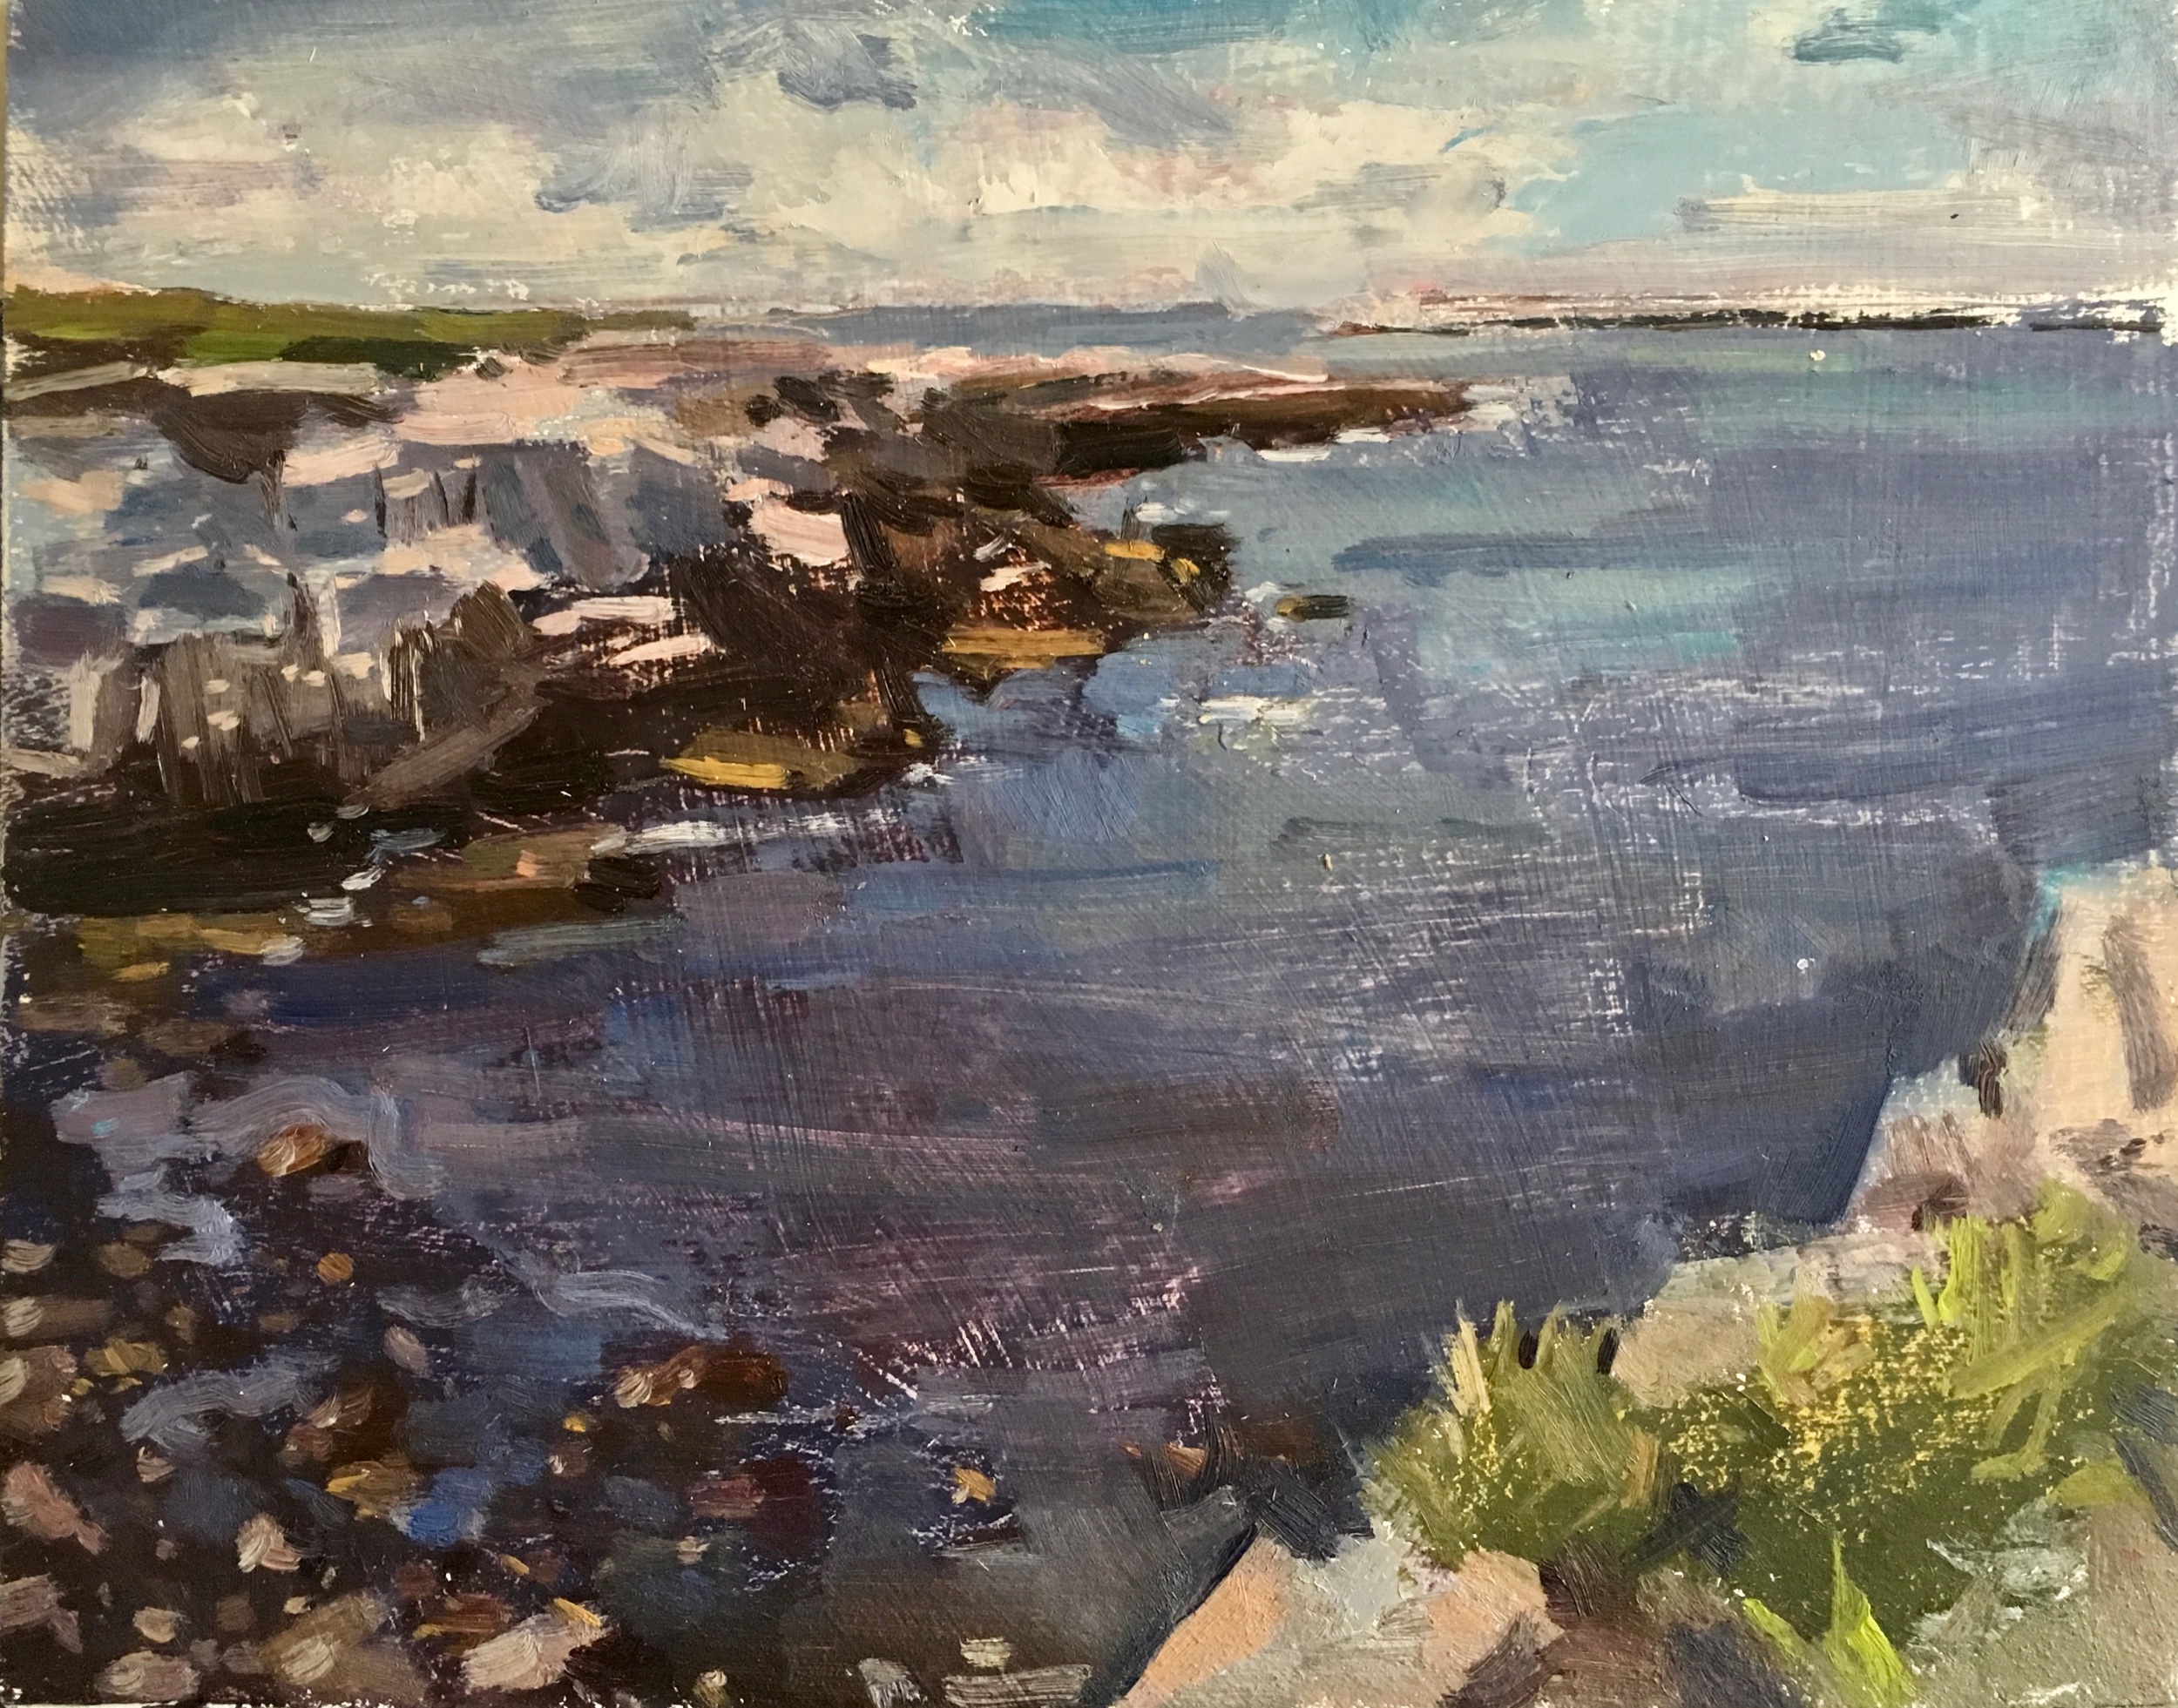 Broad Cove, oil on panel, 8x10”, 2019